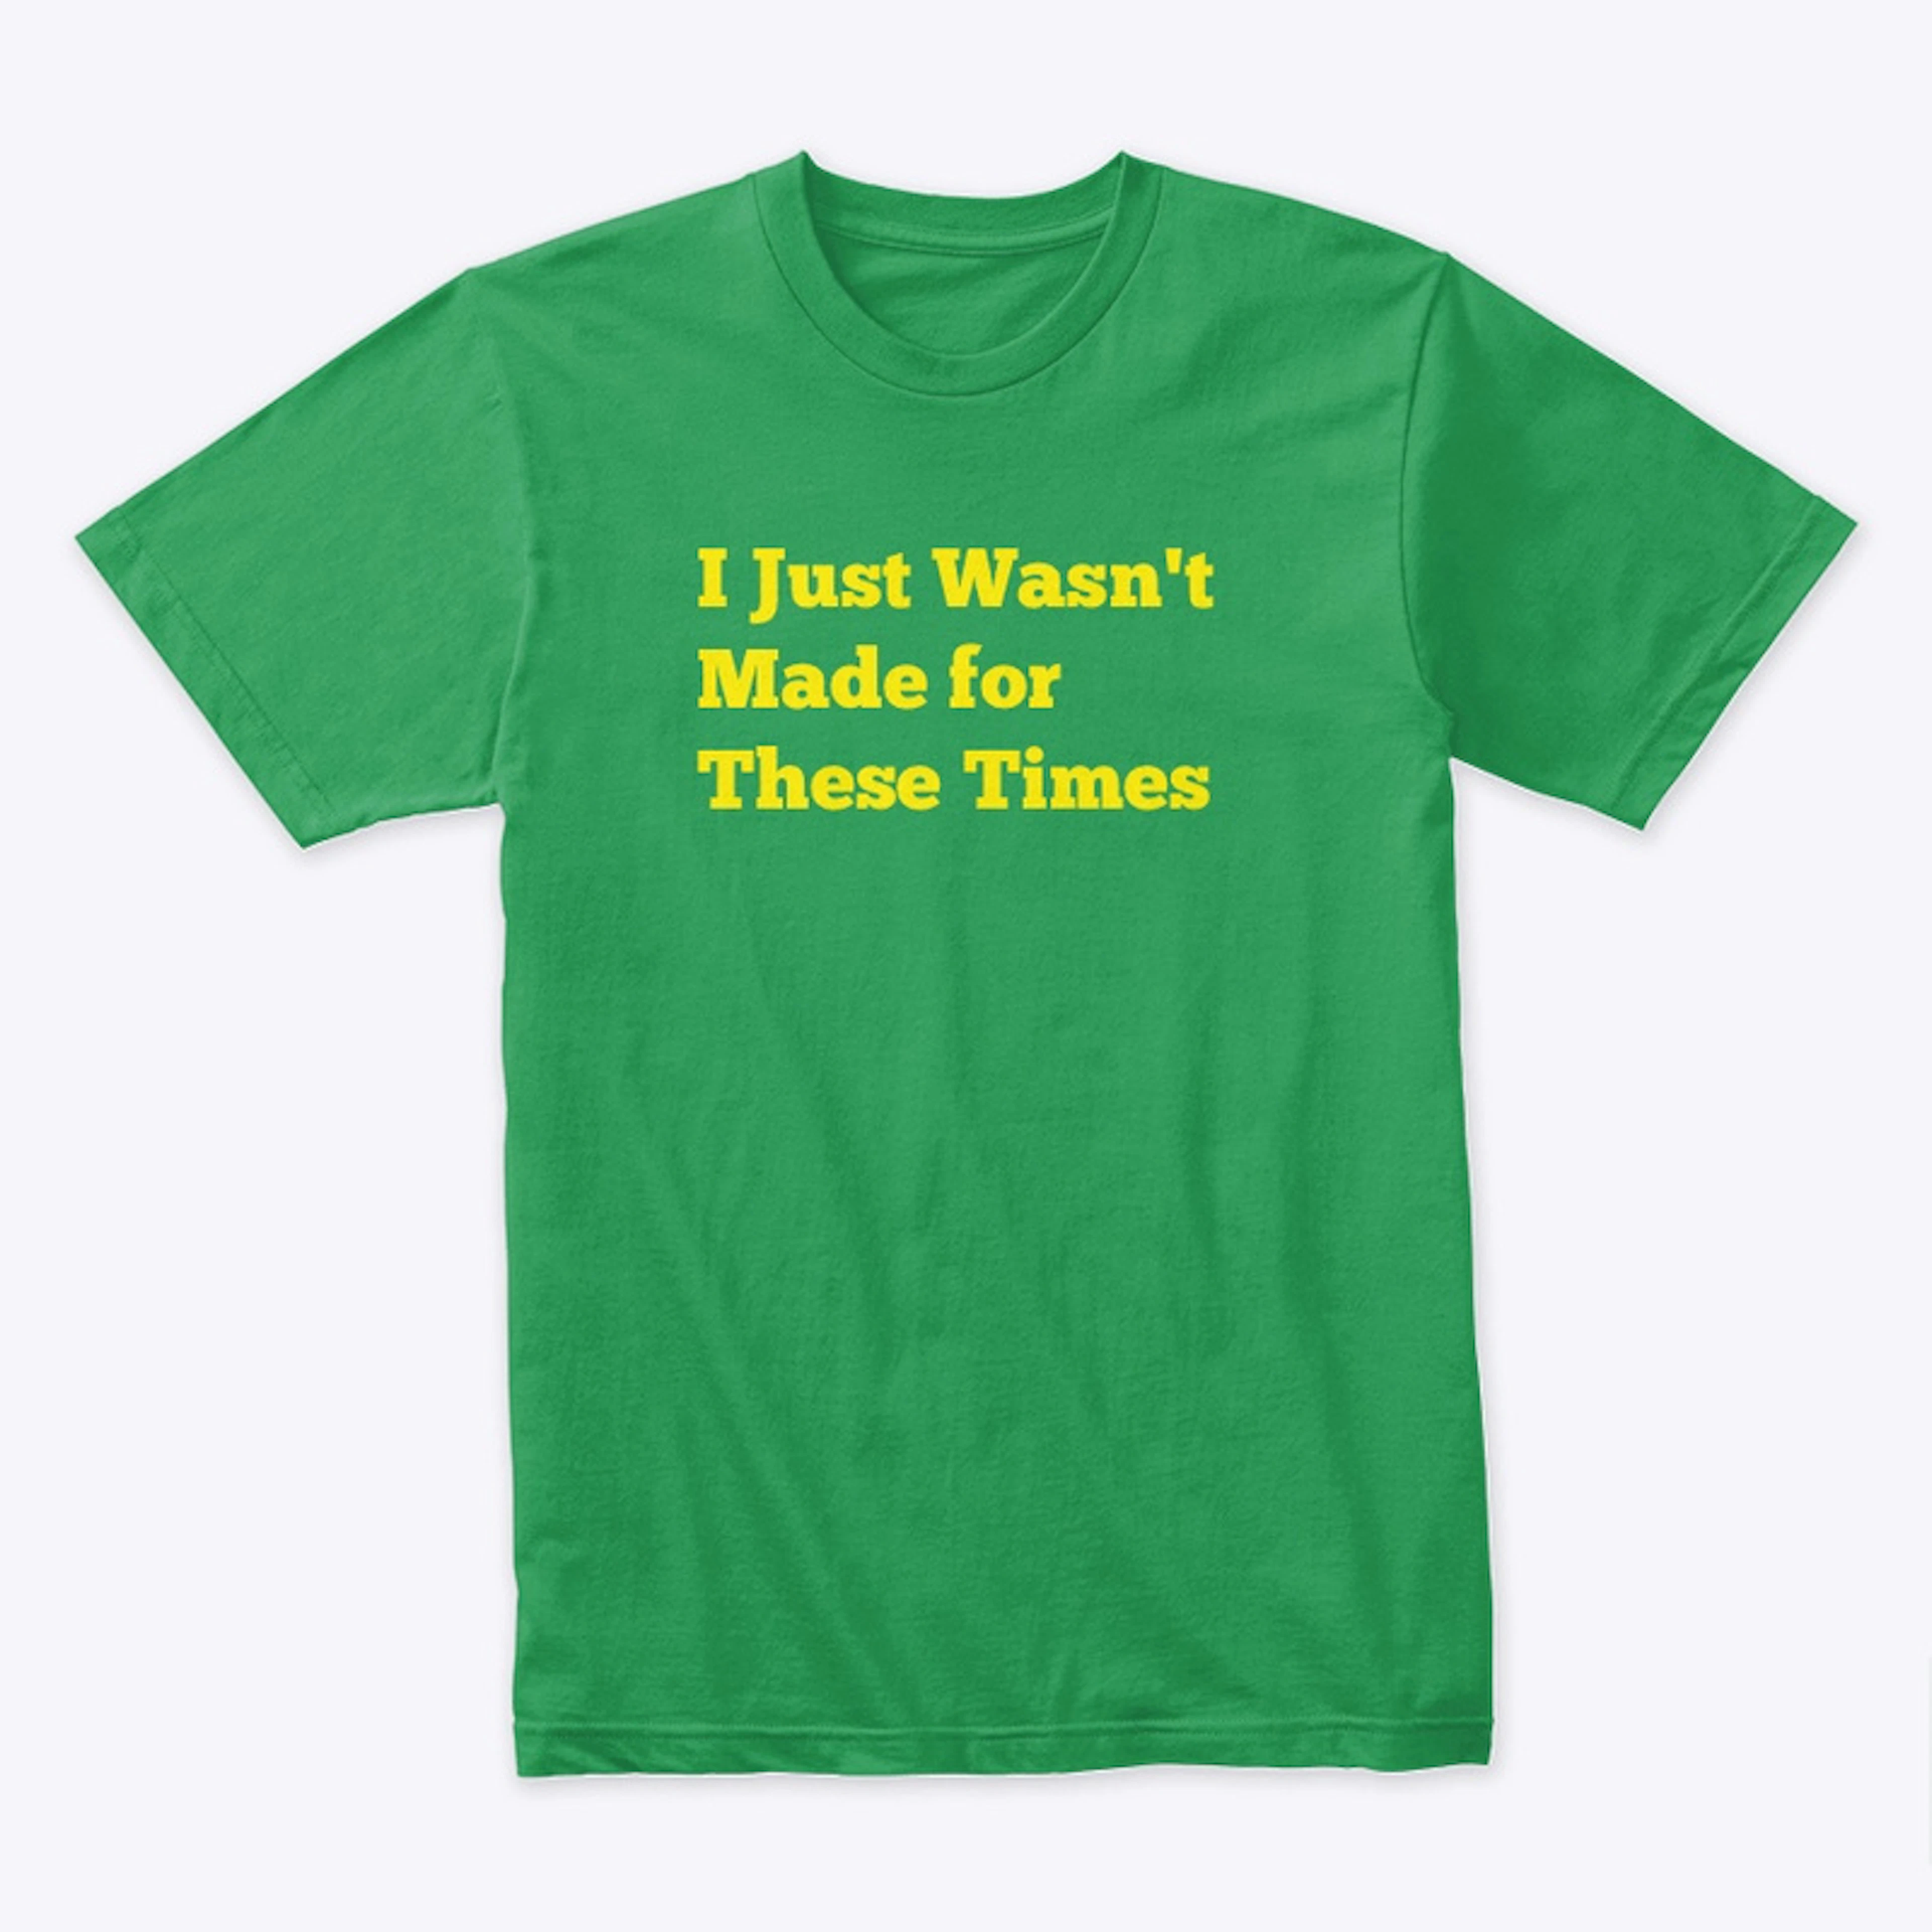 Pet Sounds Tee - Track 11